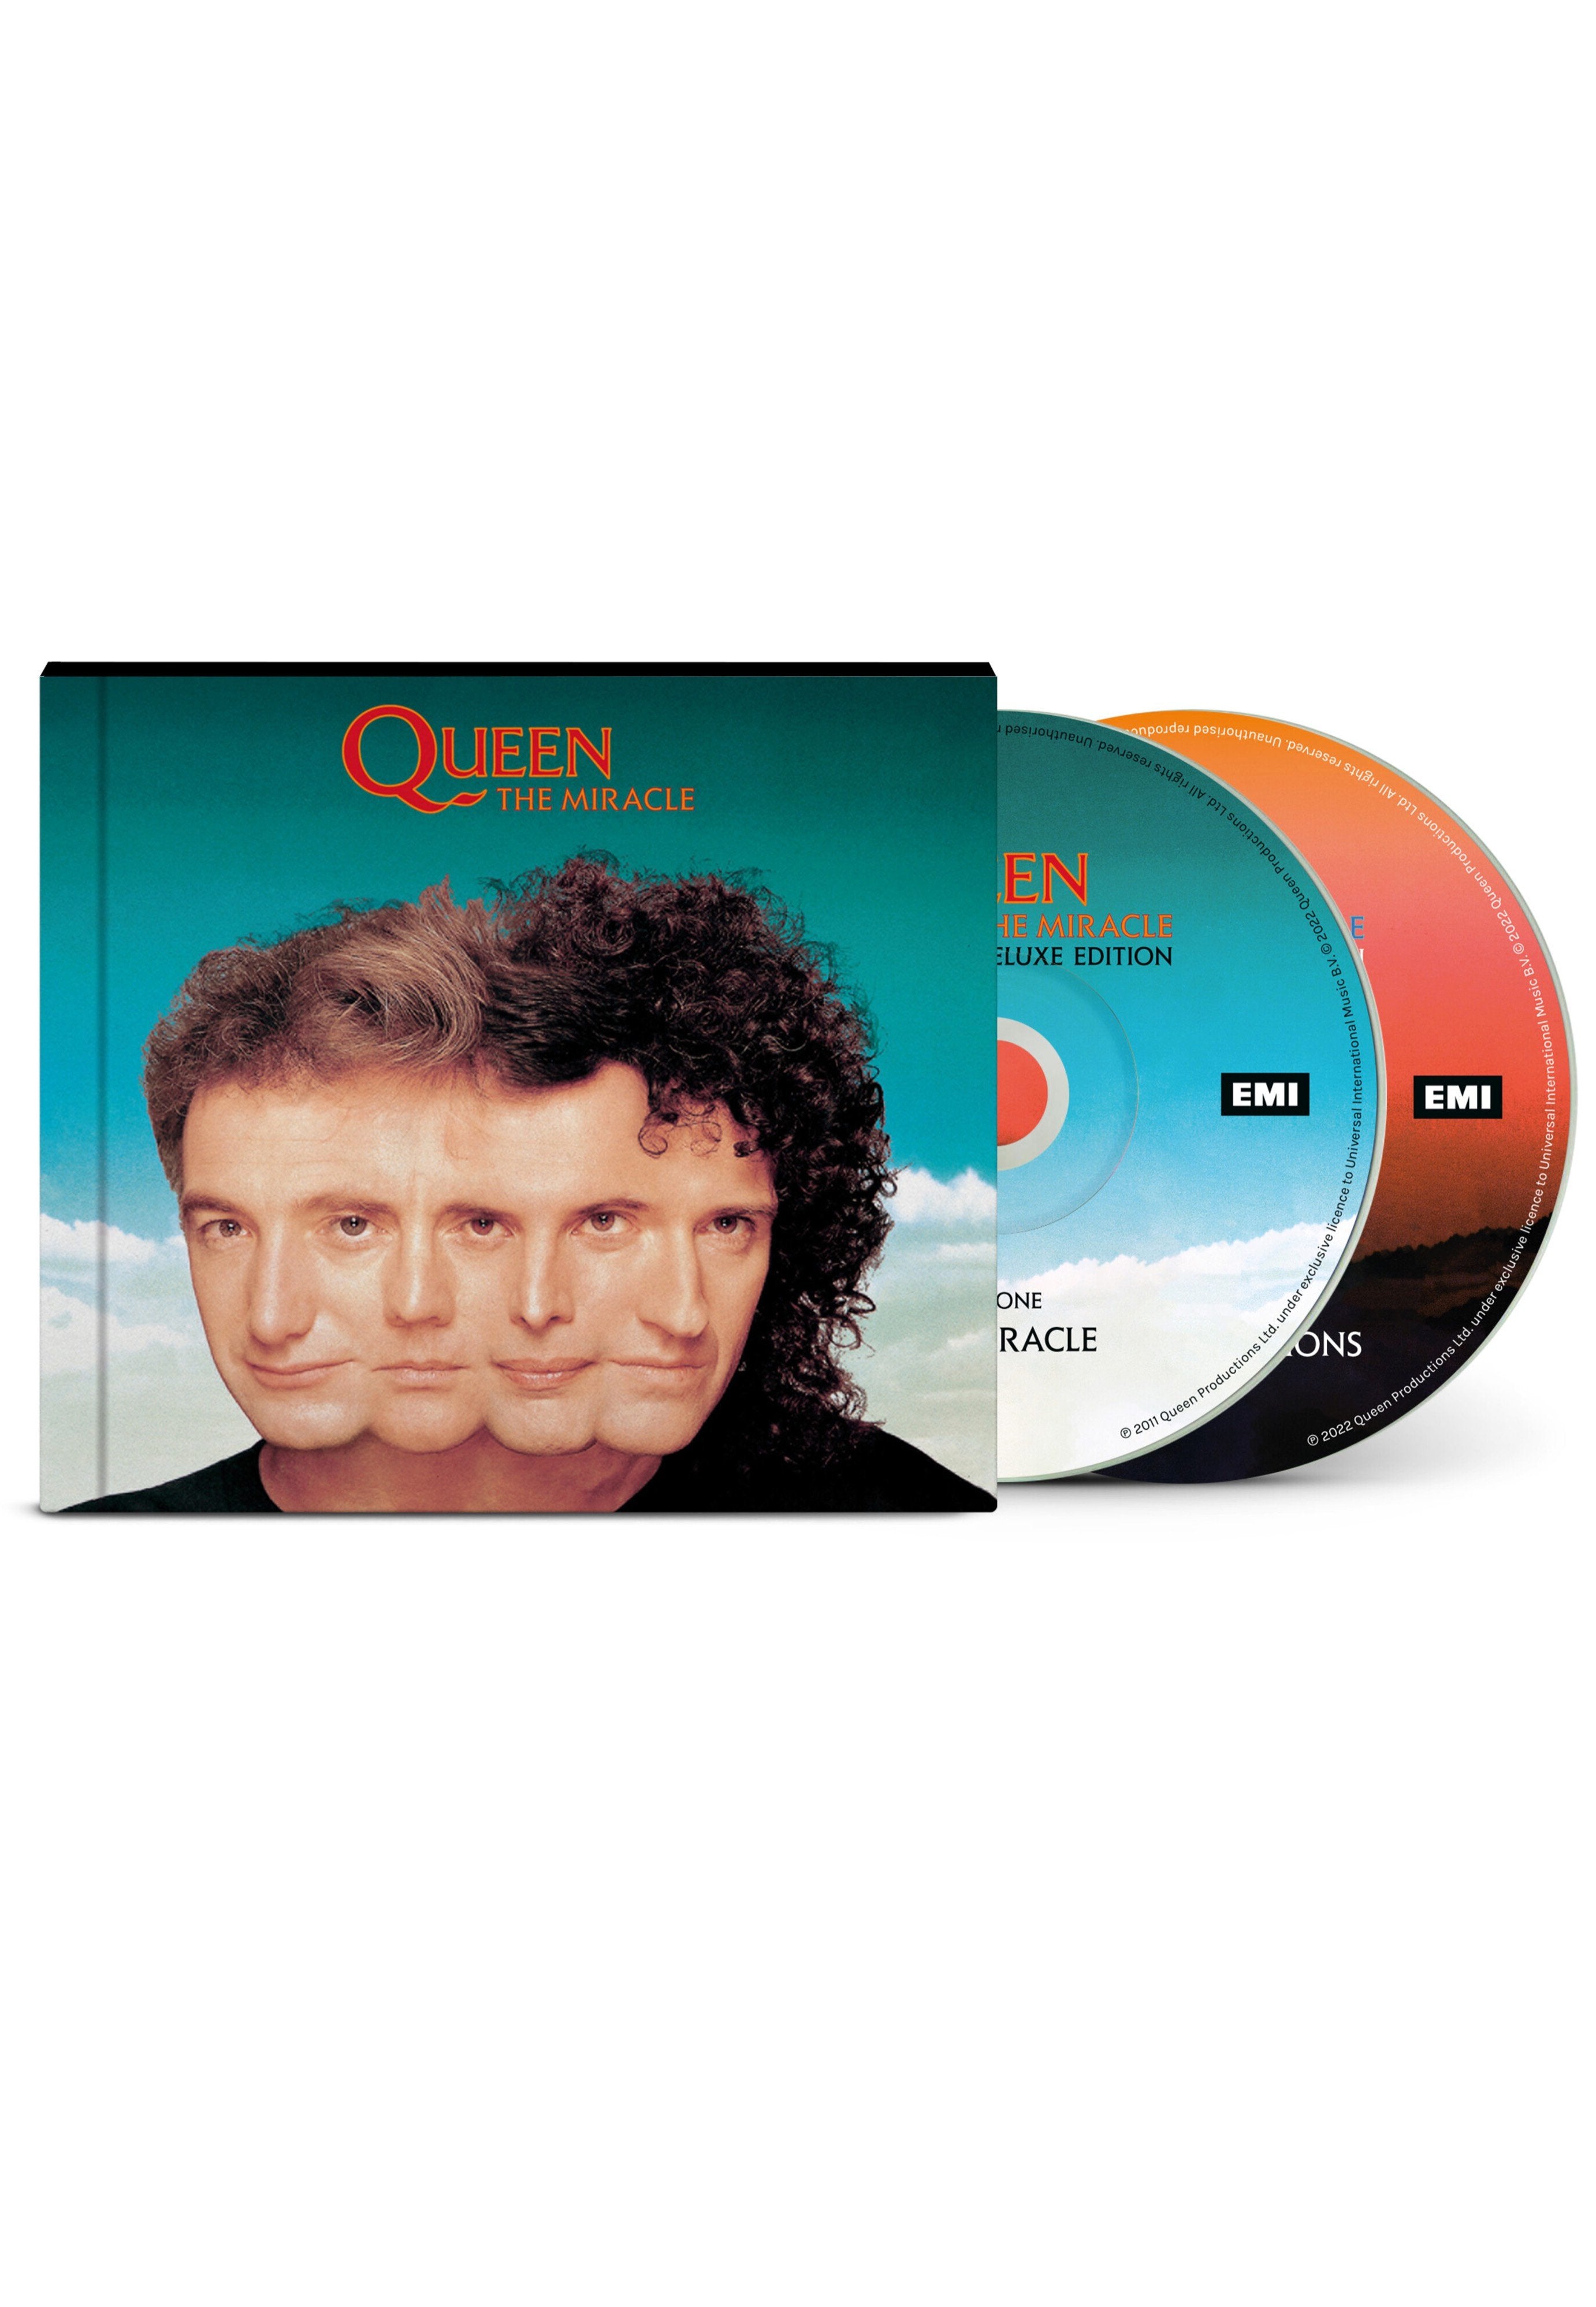 Queen - The Miracle 2022 Edition Ltd. - Hardcover 2 CD